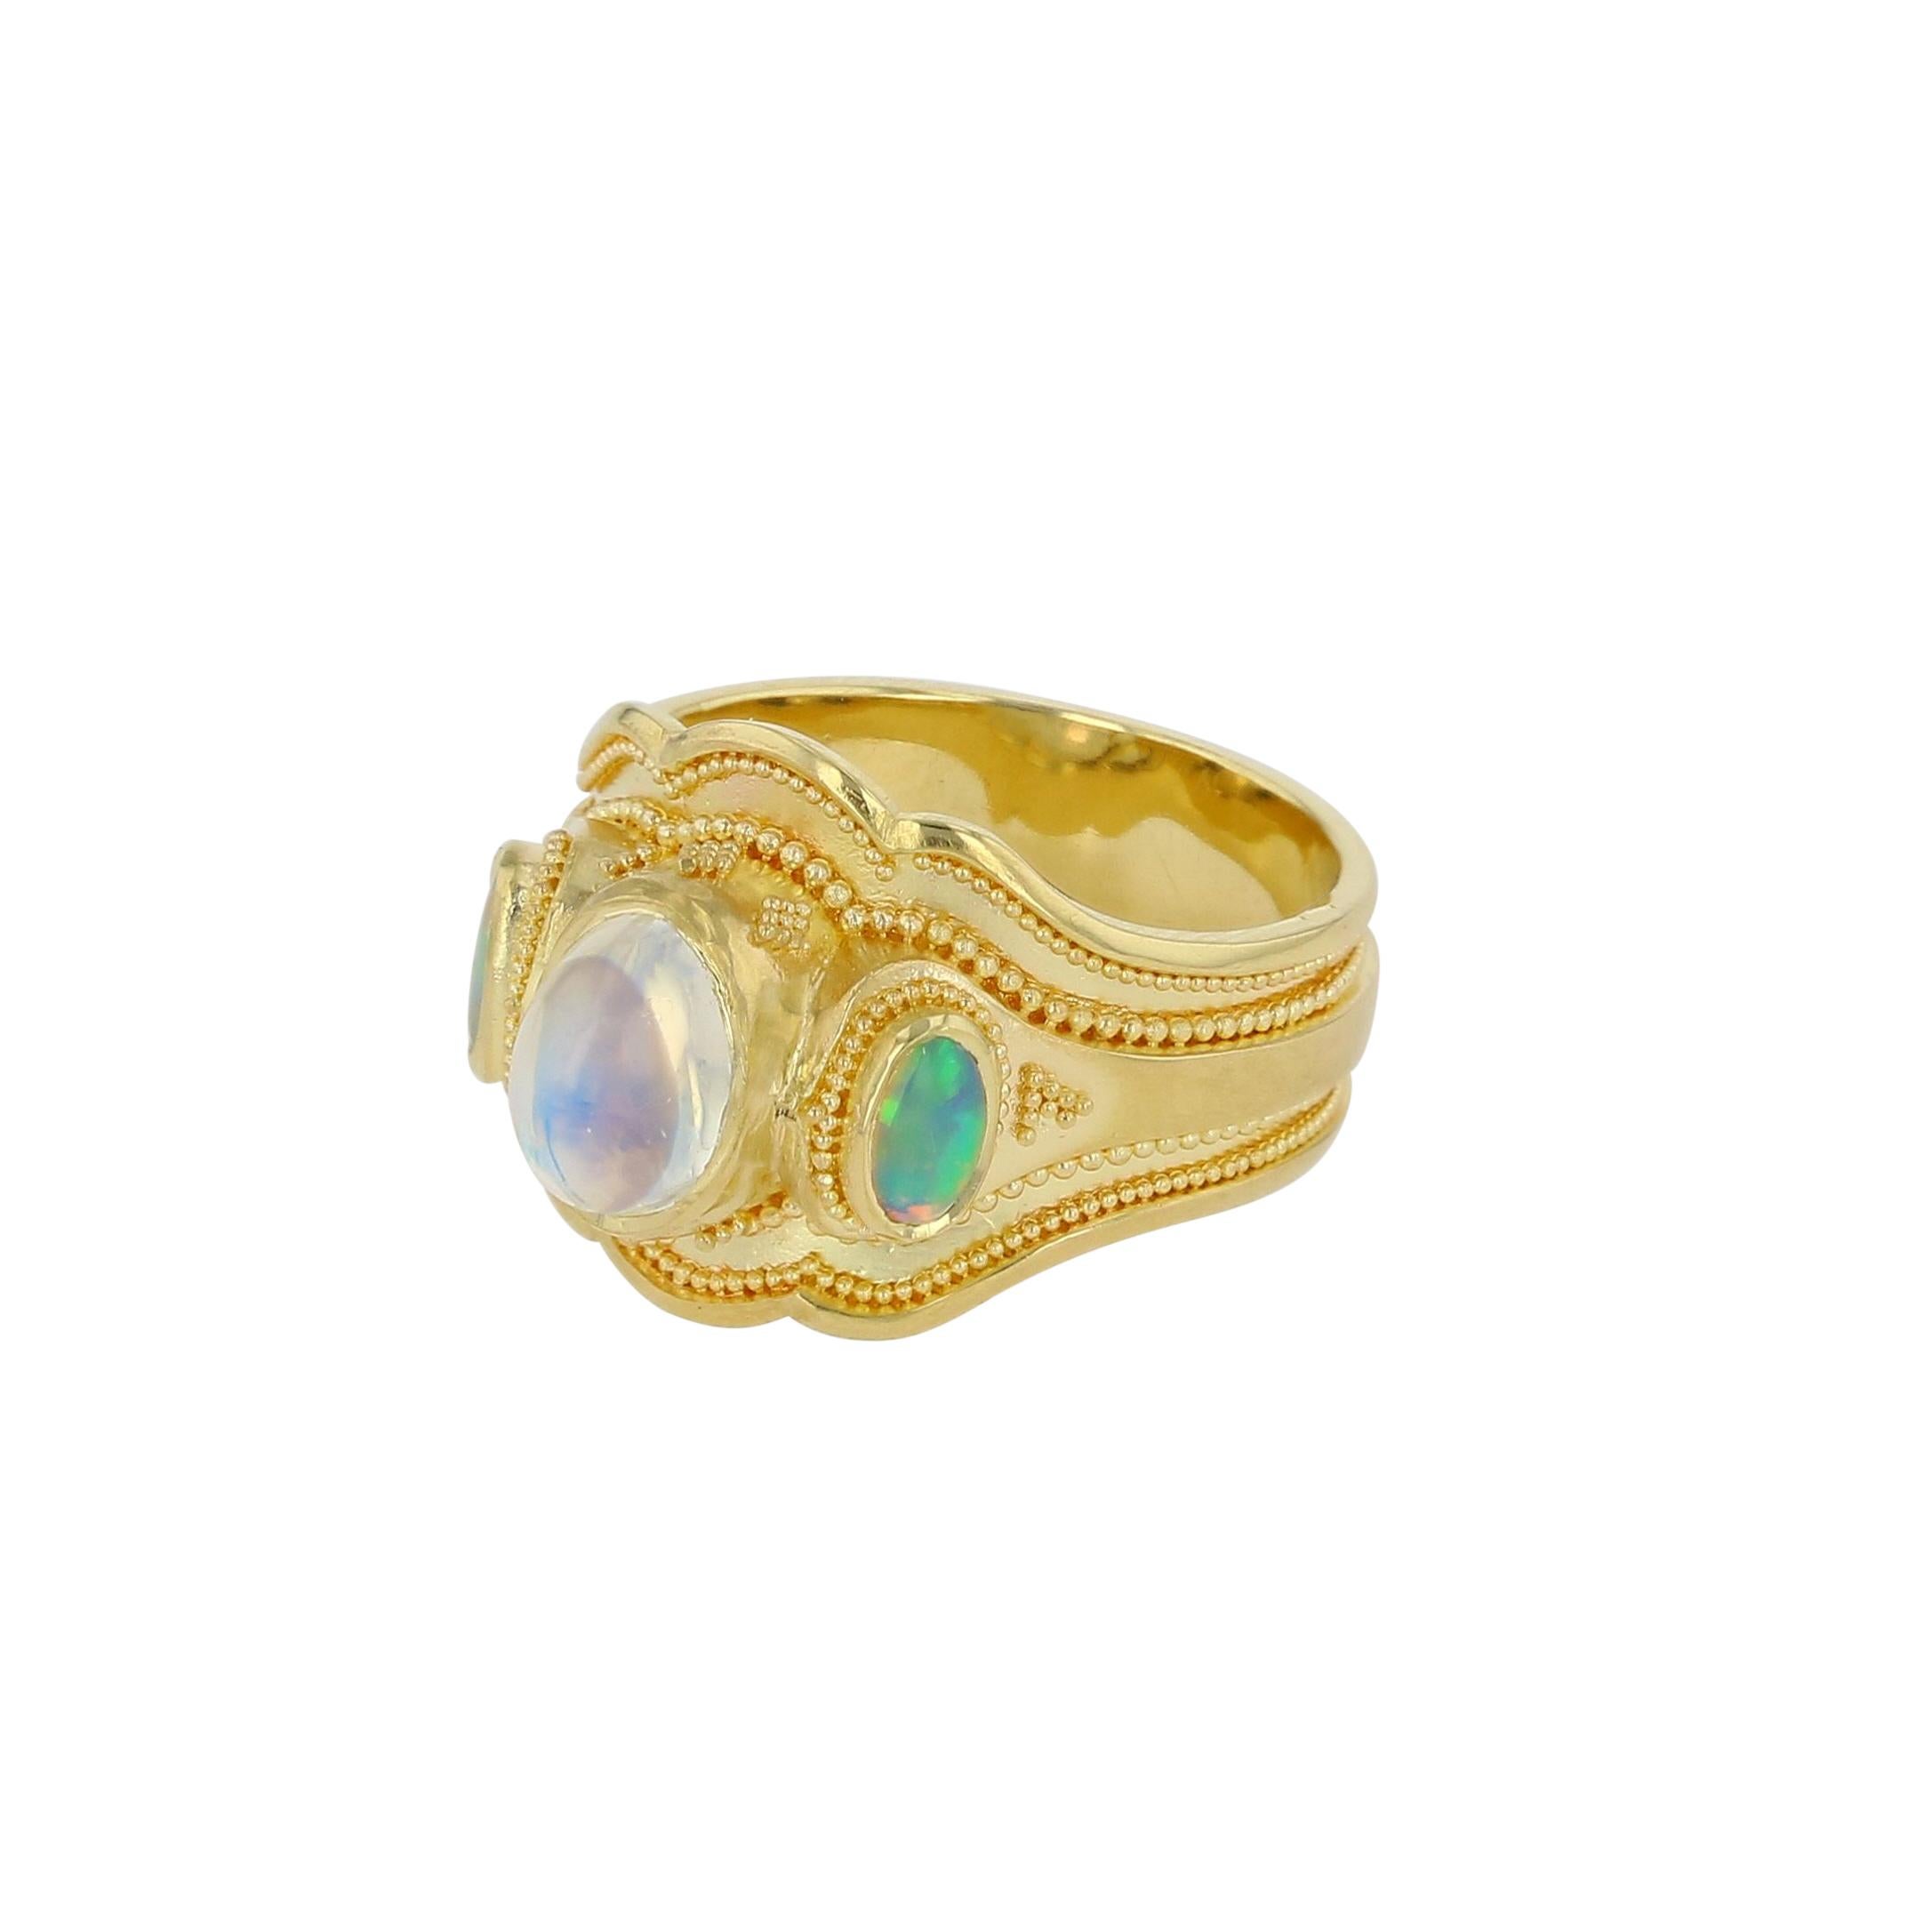 Kent Raible 18Karat Gold Cocktail Ring with Moonstone, Opals,  Fine Granulation For Sale 2